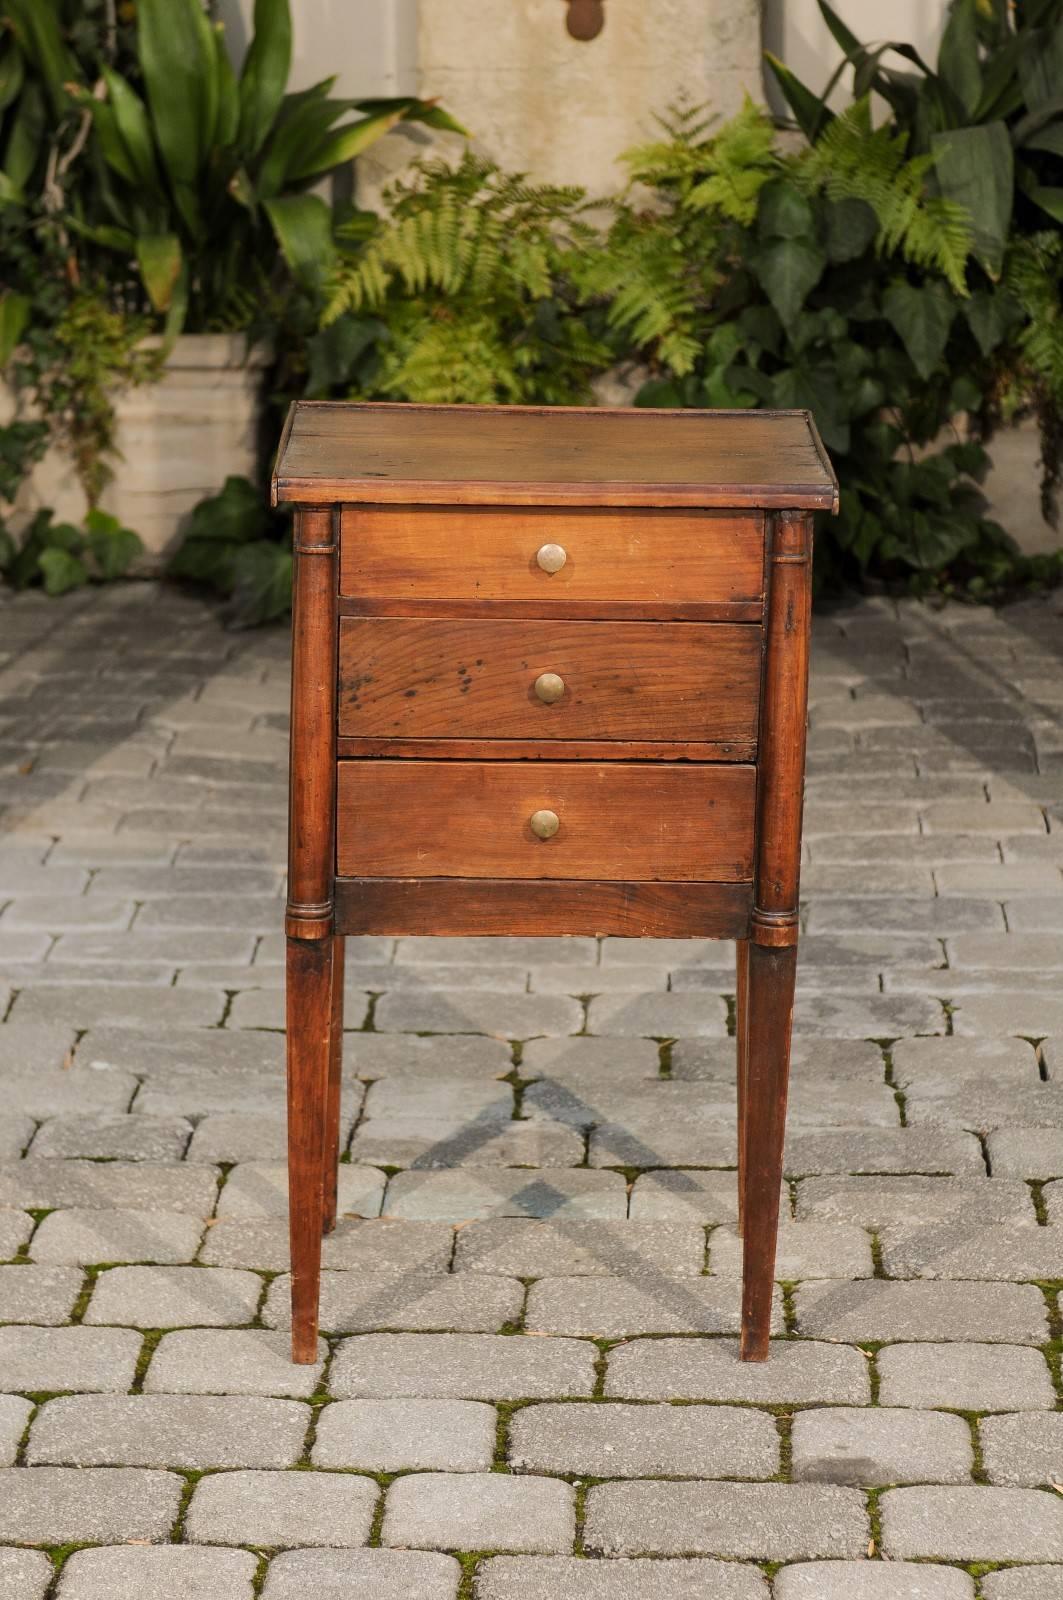 A French petite walnut Neoclassical commode with three drawers, semi-columns and tapered legs from the early years of the 19th century. This French petite commode features a rectangular top surrounded by a flat molding on three sides, sitting above